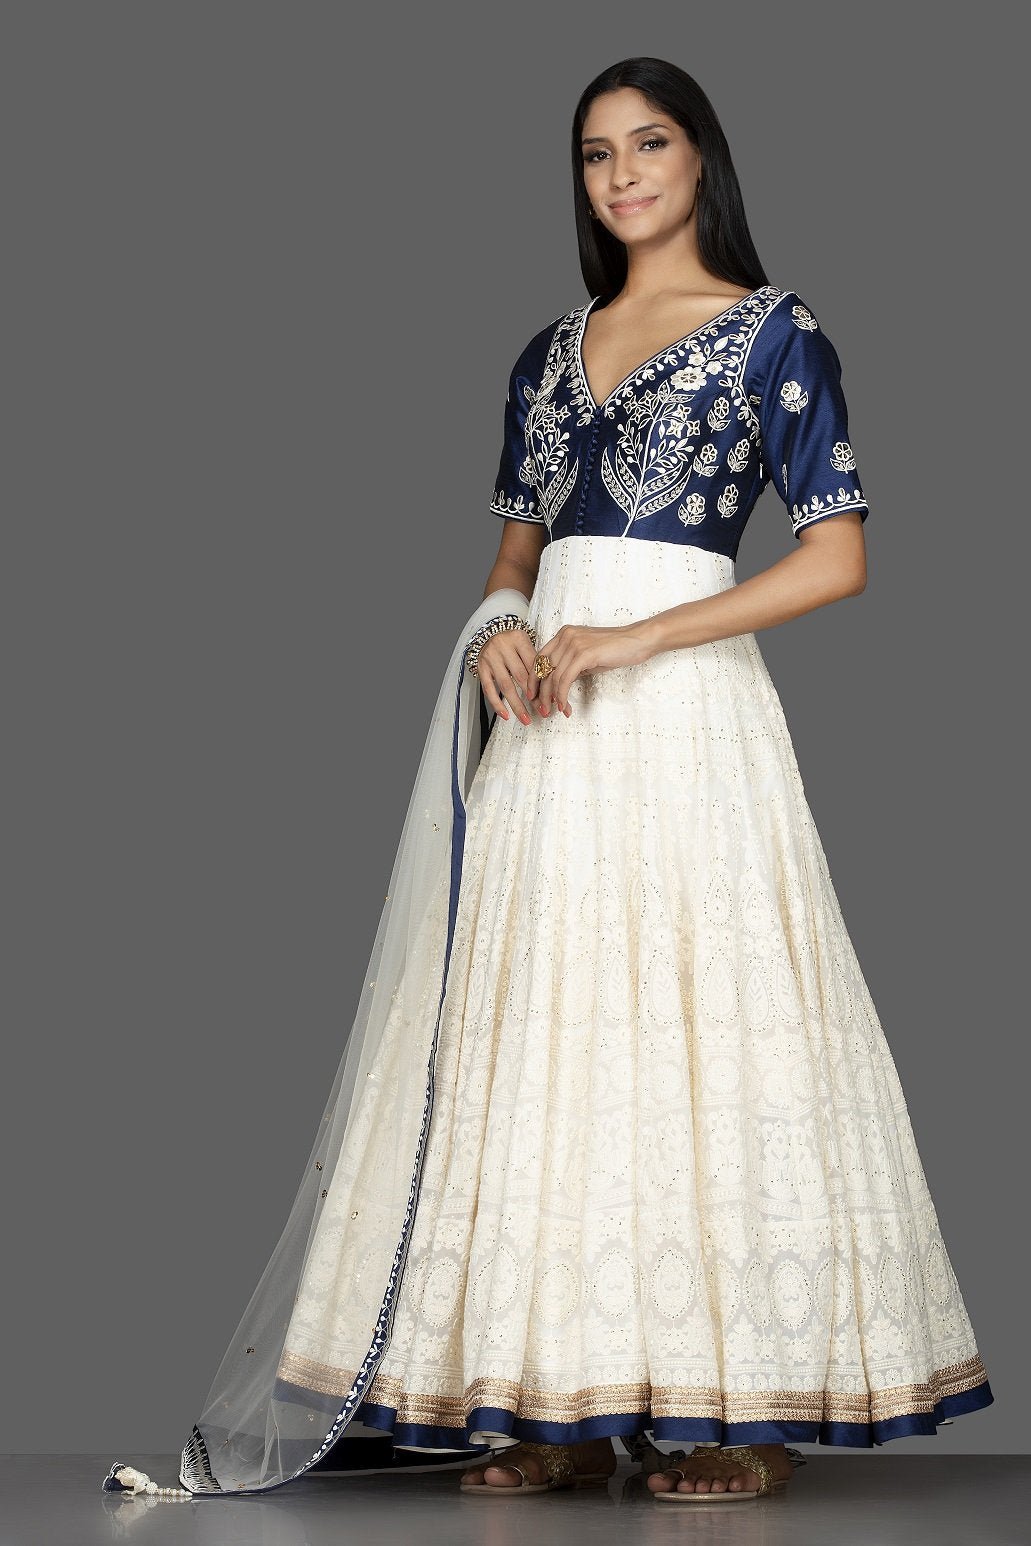 Buy beautiful off-white and blue Lucknowi work georgette Anarkali suit online in USA with dupatta. Spread ethnic elegance on weddings and special occasions in splendid designer lehengas, Anarkali suits crafted with exquisite Indian craftsmanship from Pure Elegance Indian fashion store in USA.-side